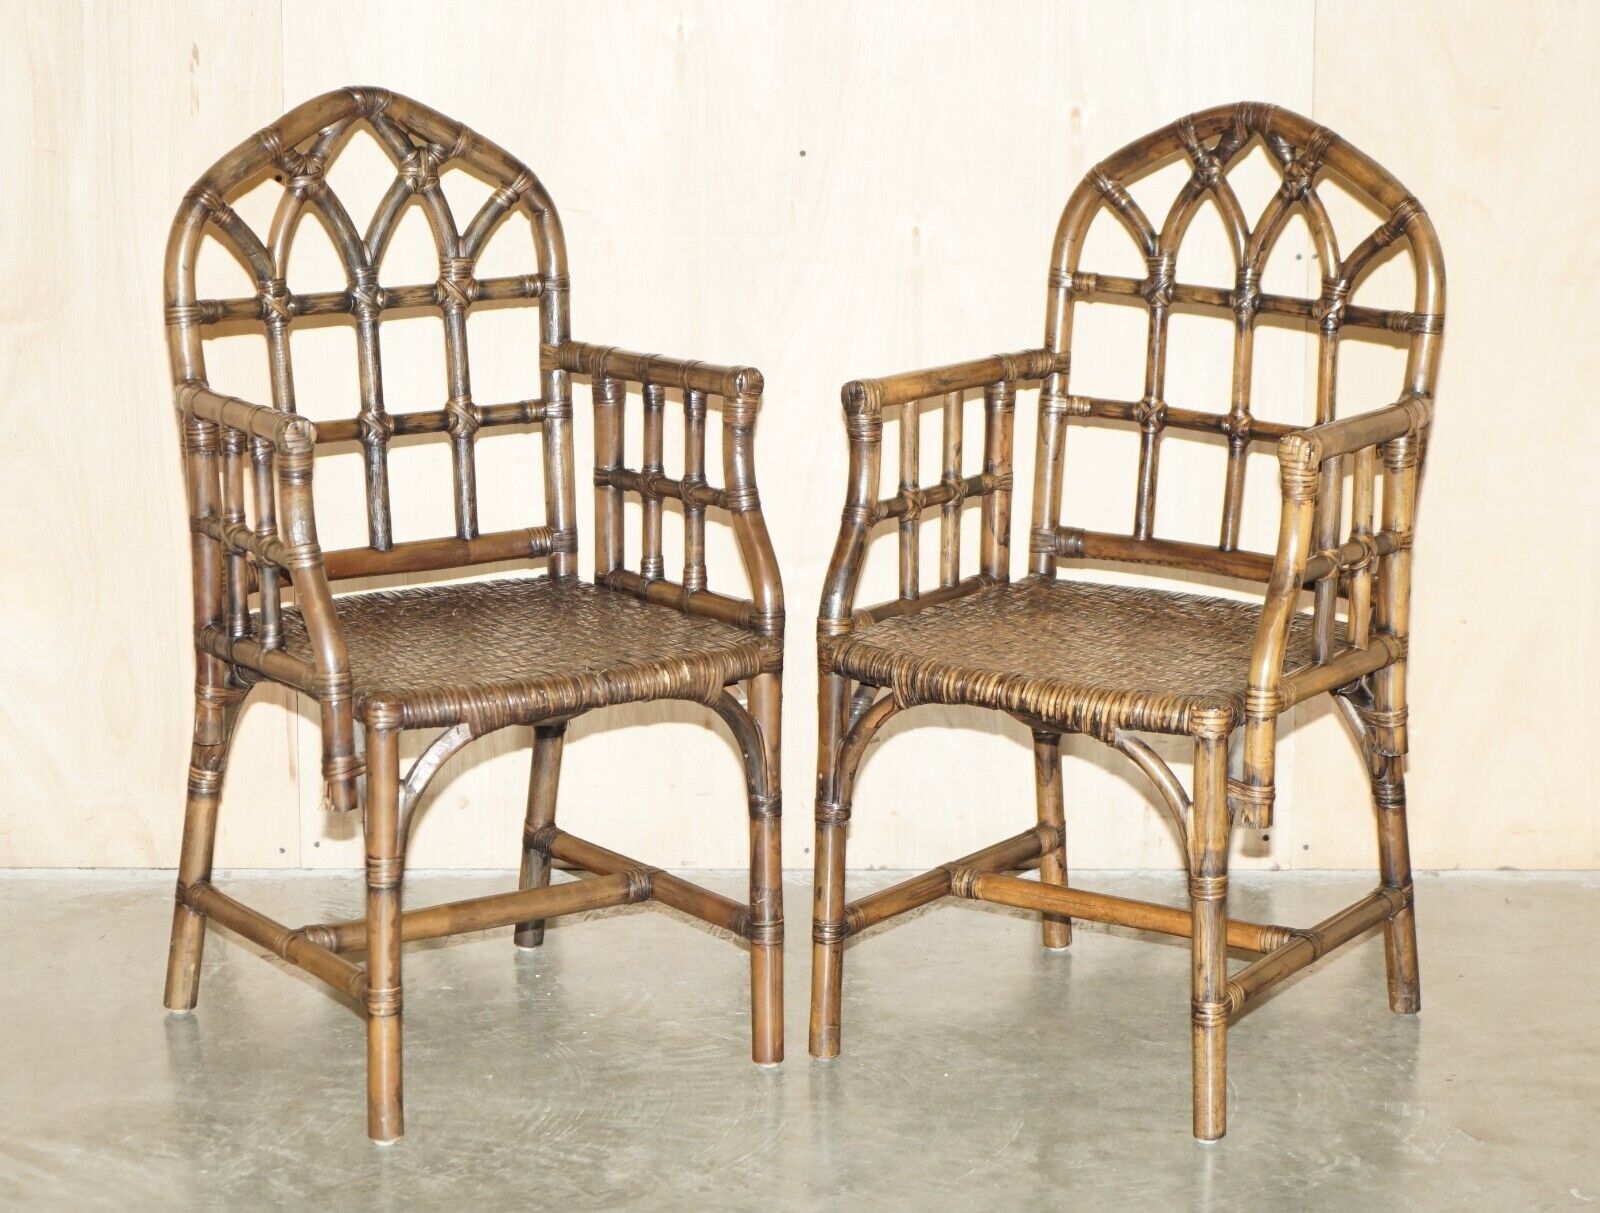 EXQUISITE PAIR OF MID CENTURY MCGUIRE RATTAN GOTHIC CATHEDRAL BACK ARMCHAIRS